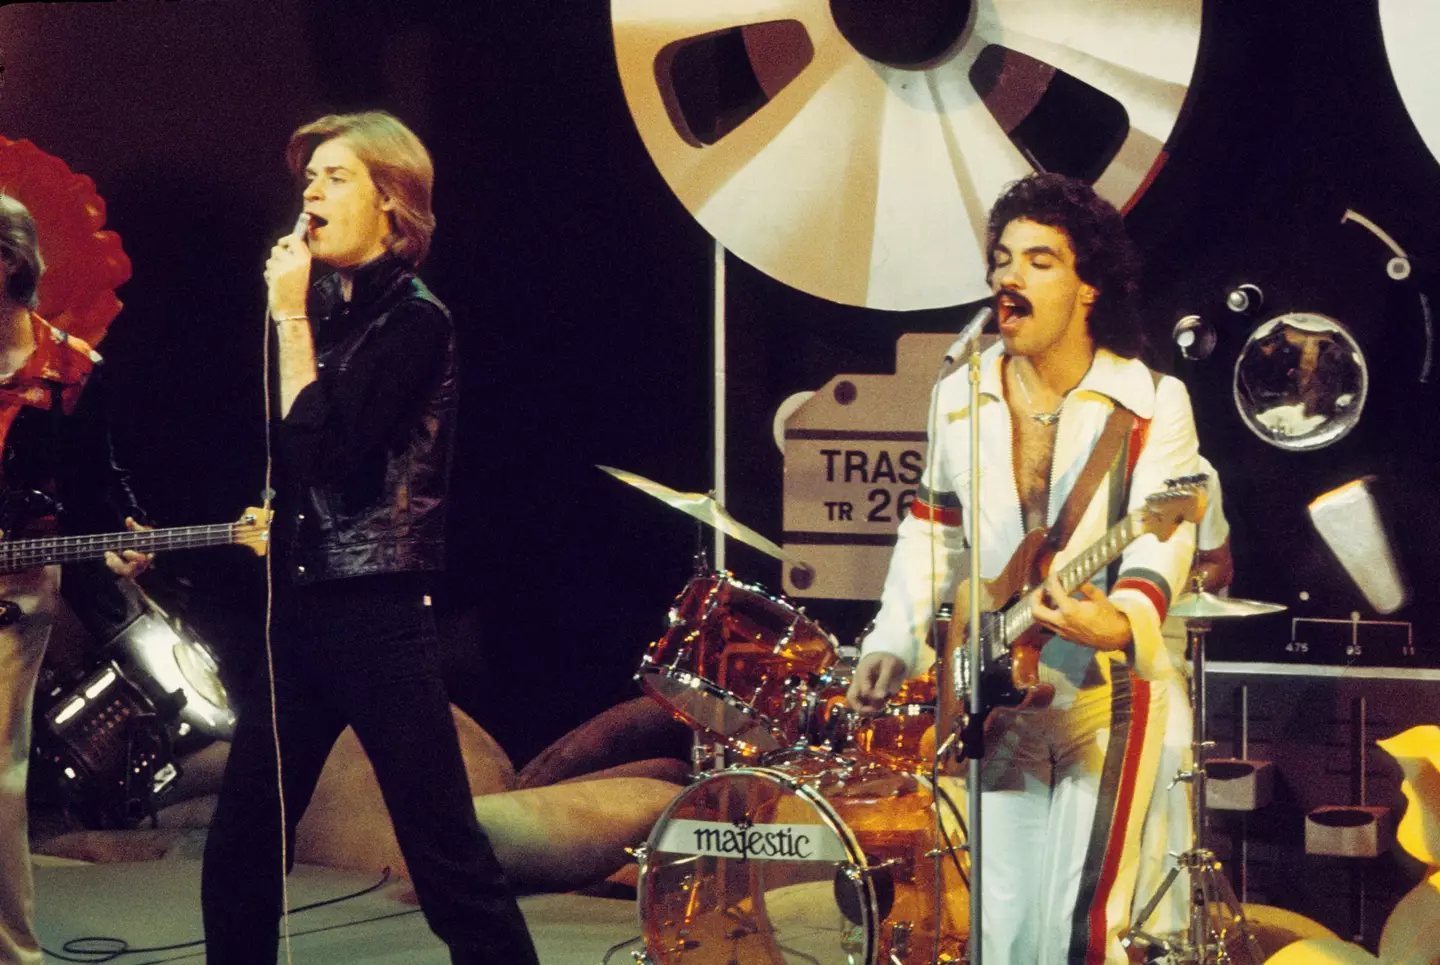 Hall and Oates pictured performing together in 1975.